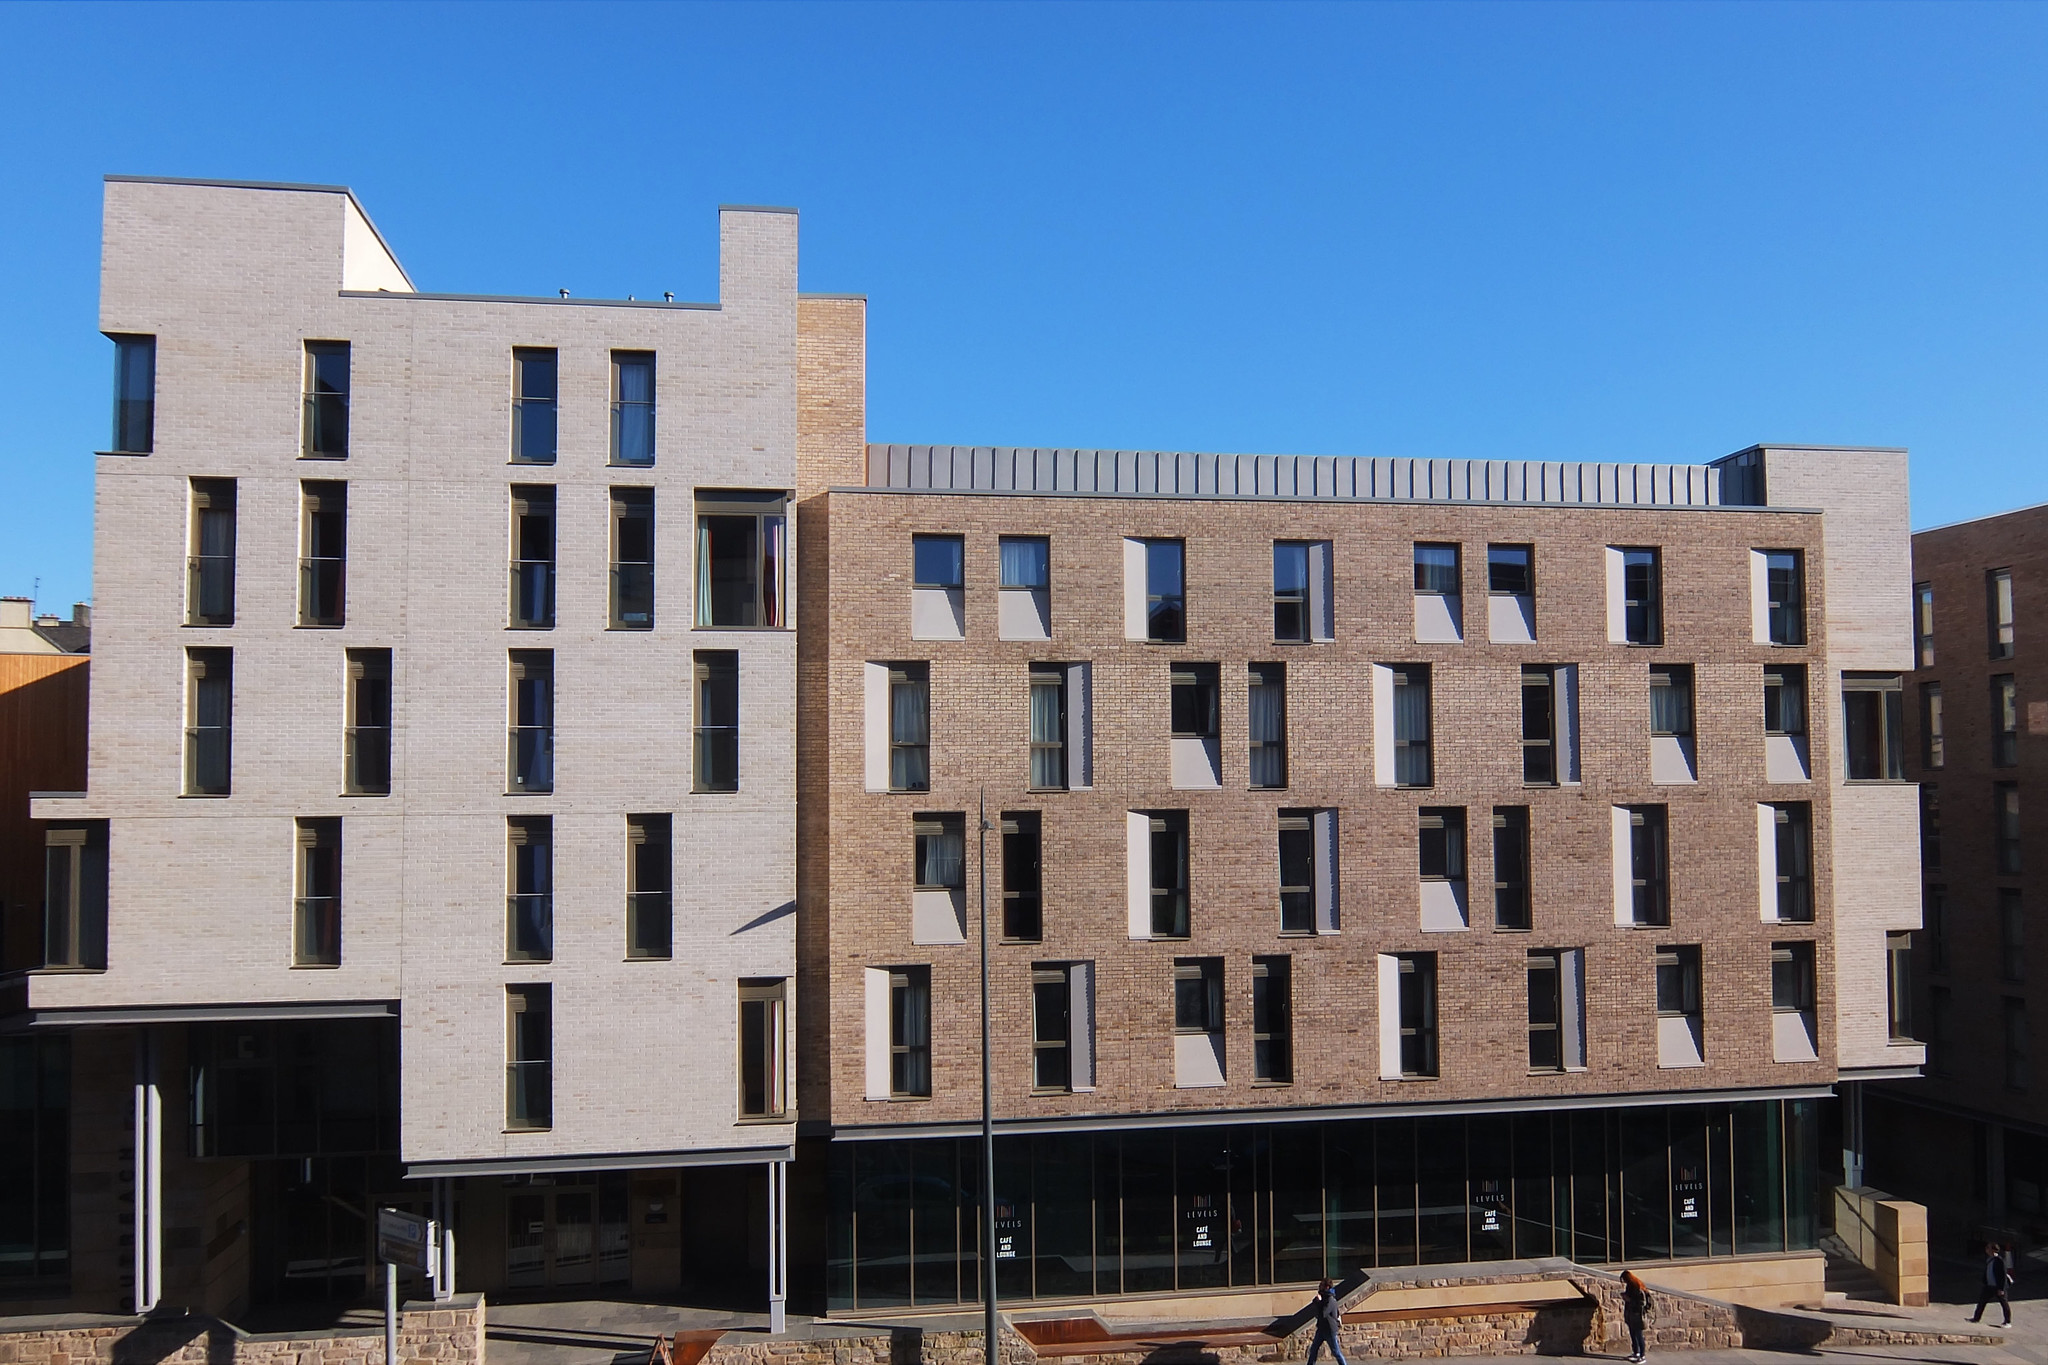 Front of a student accomodation building, new build with lots of windows